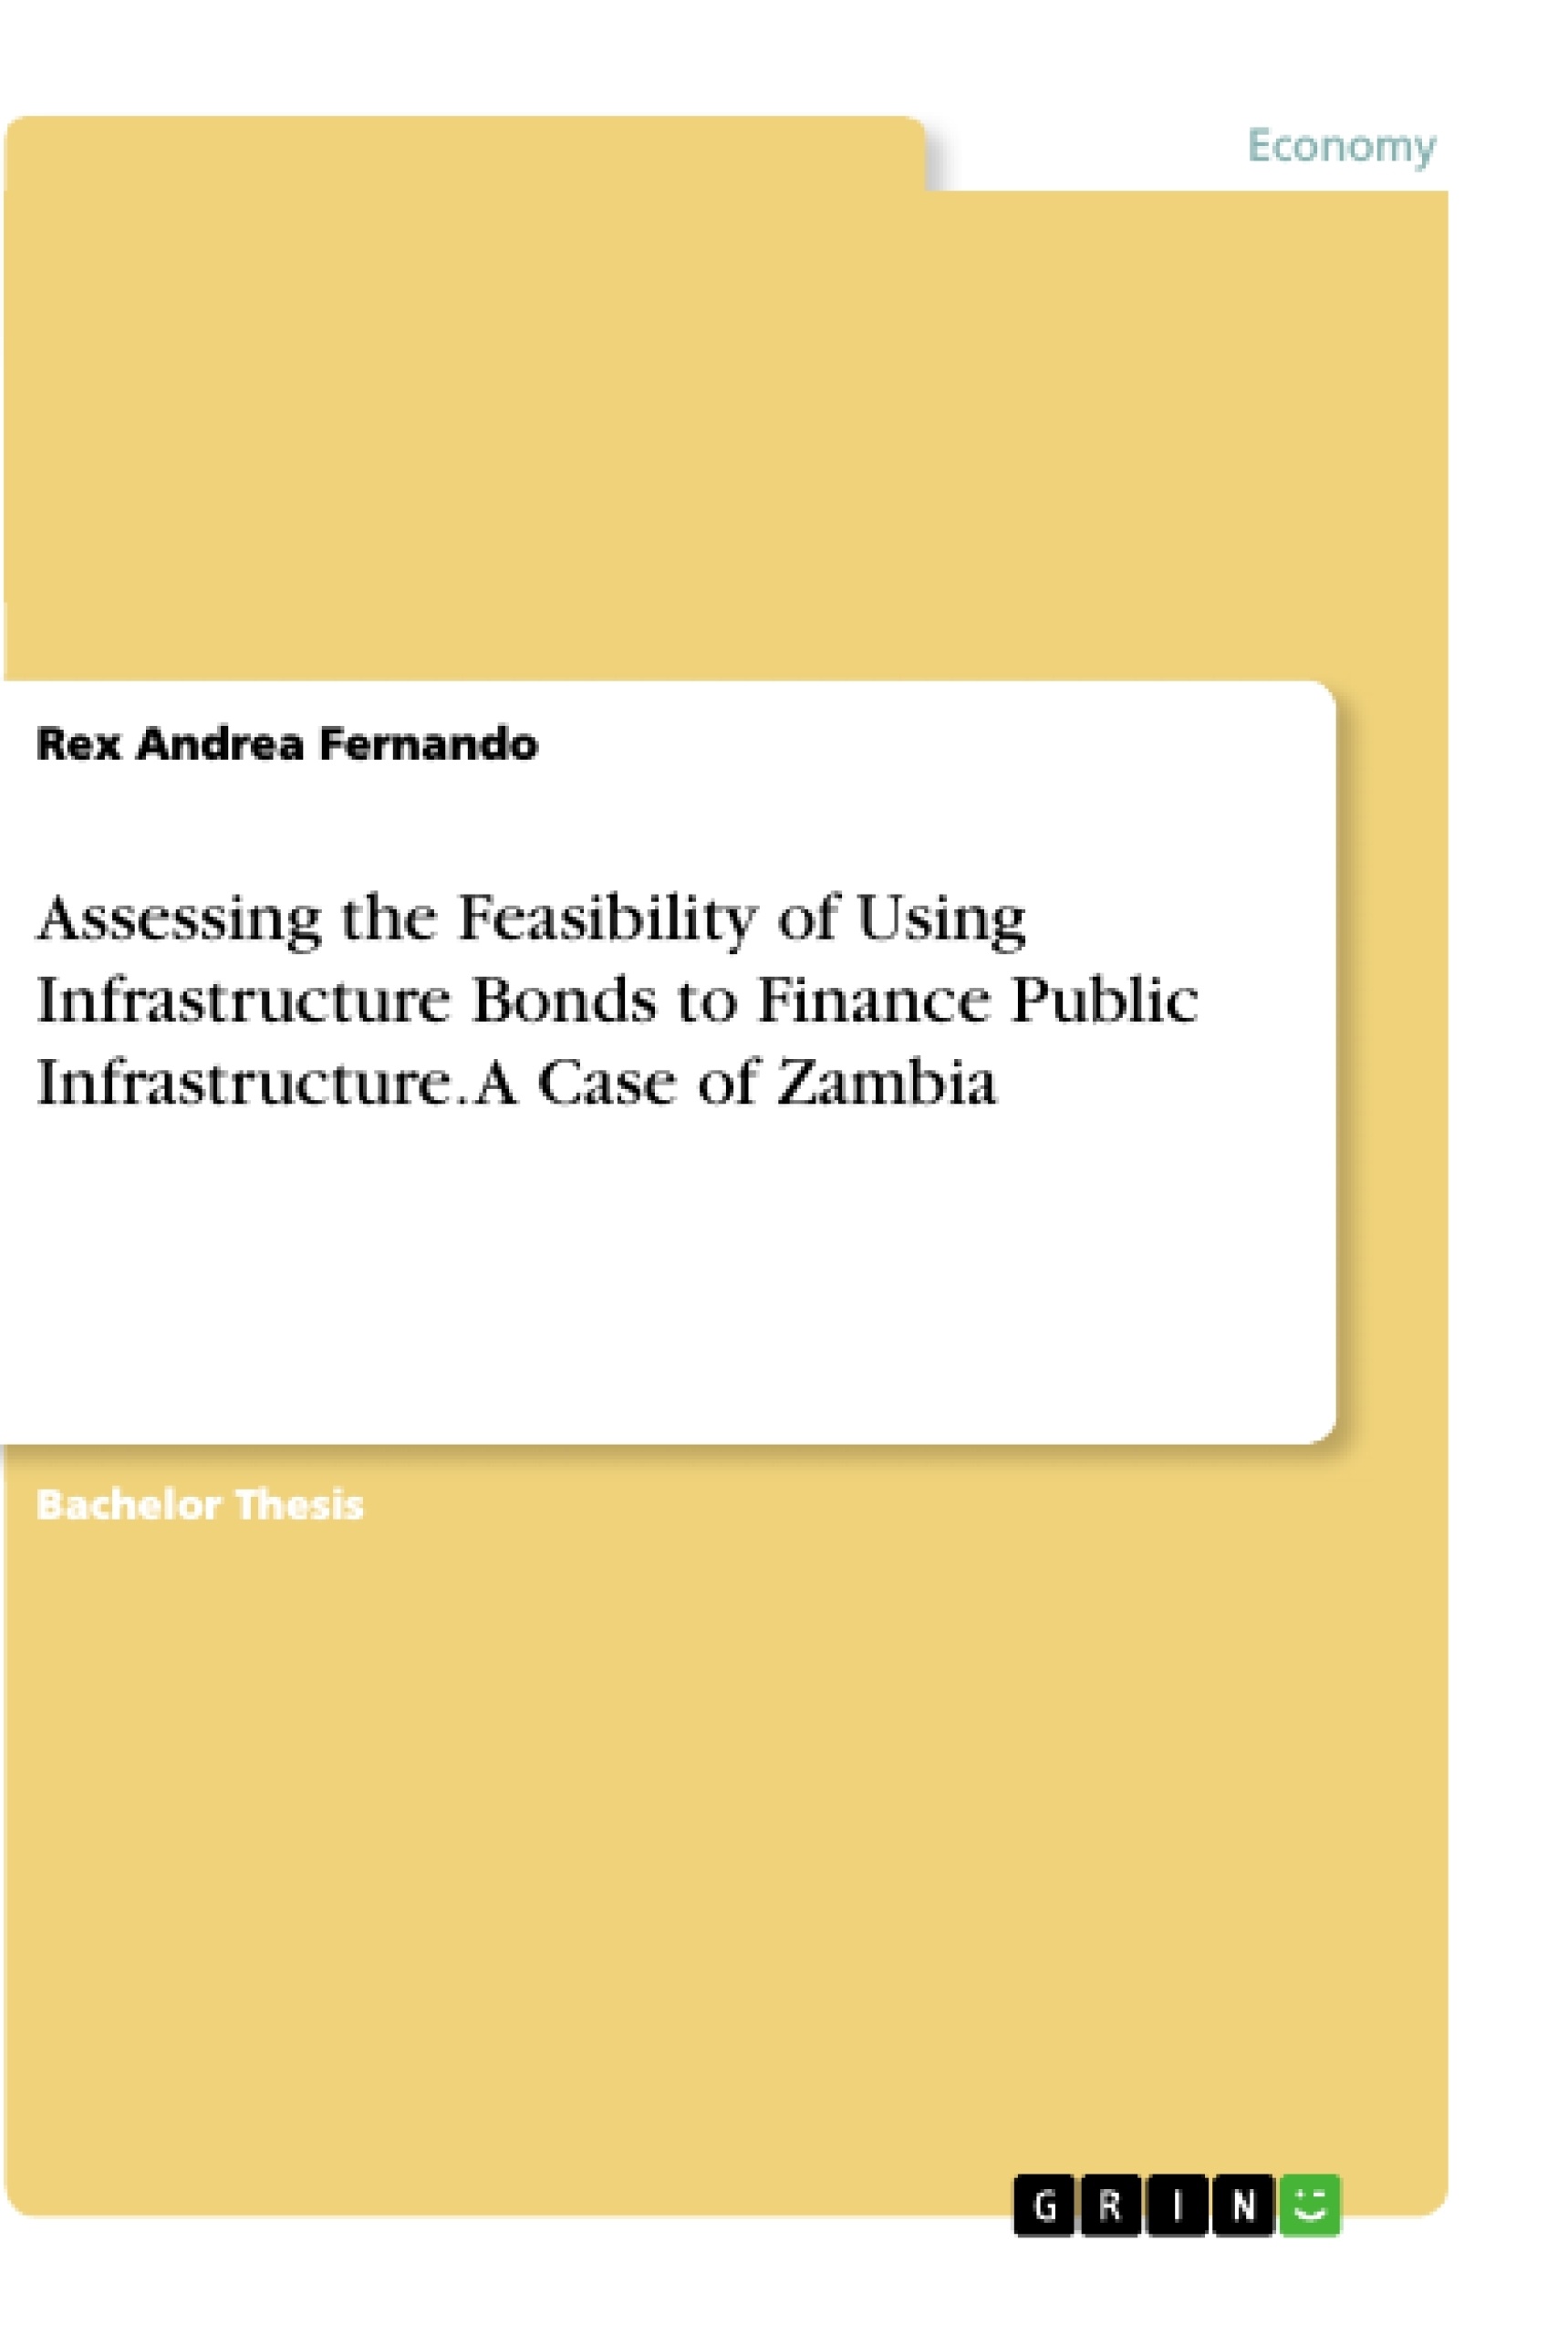 Title: Assessing the Feasibility of Using Infrastructure Bonds to Finance Public Infrastructure. A Case of Zambia